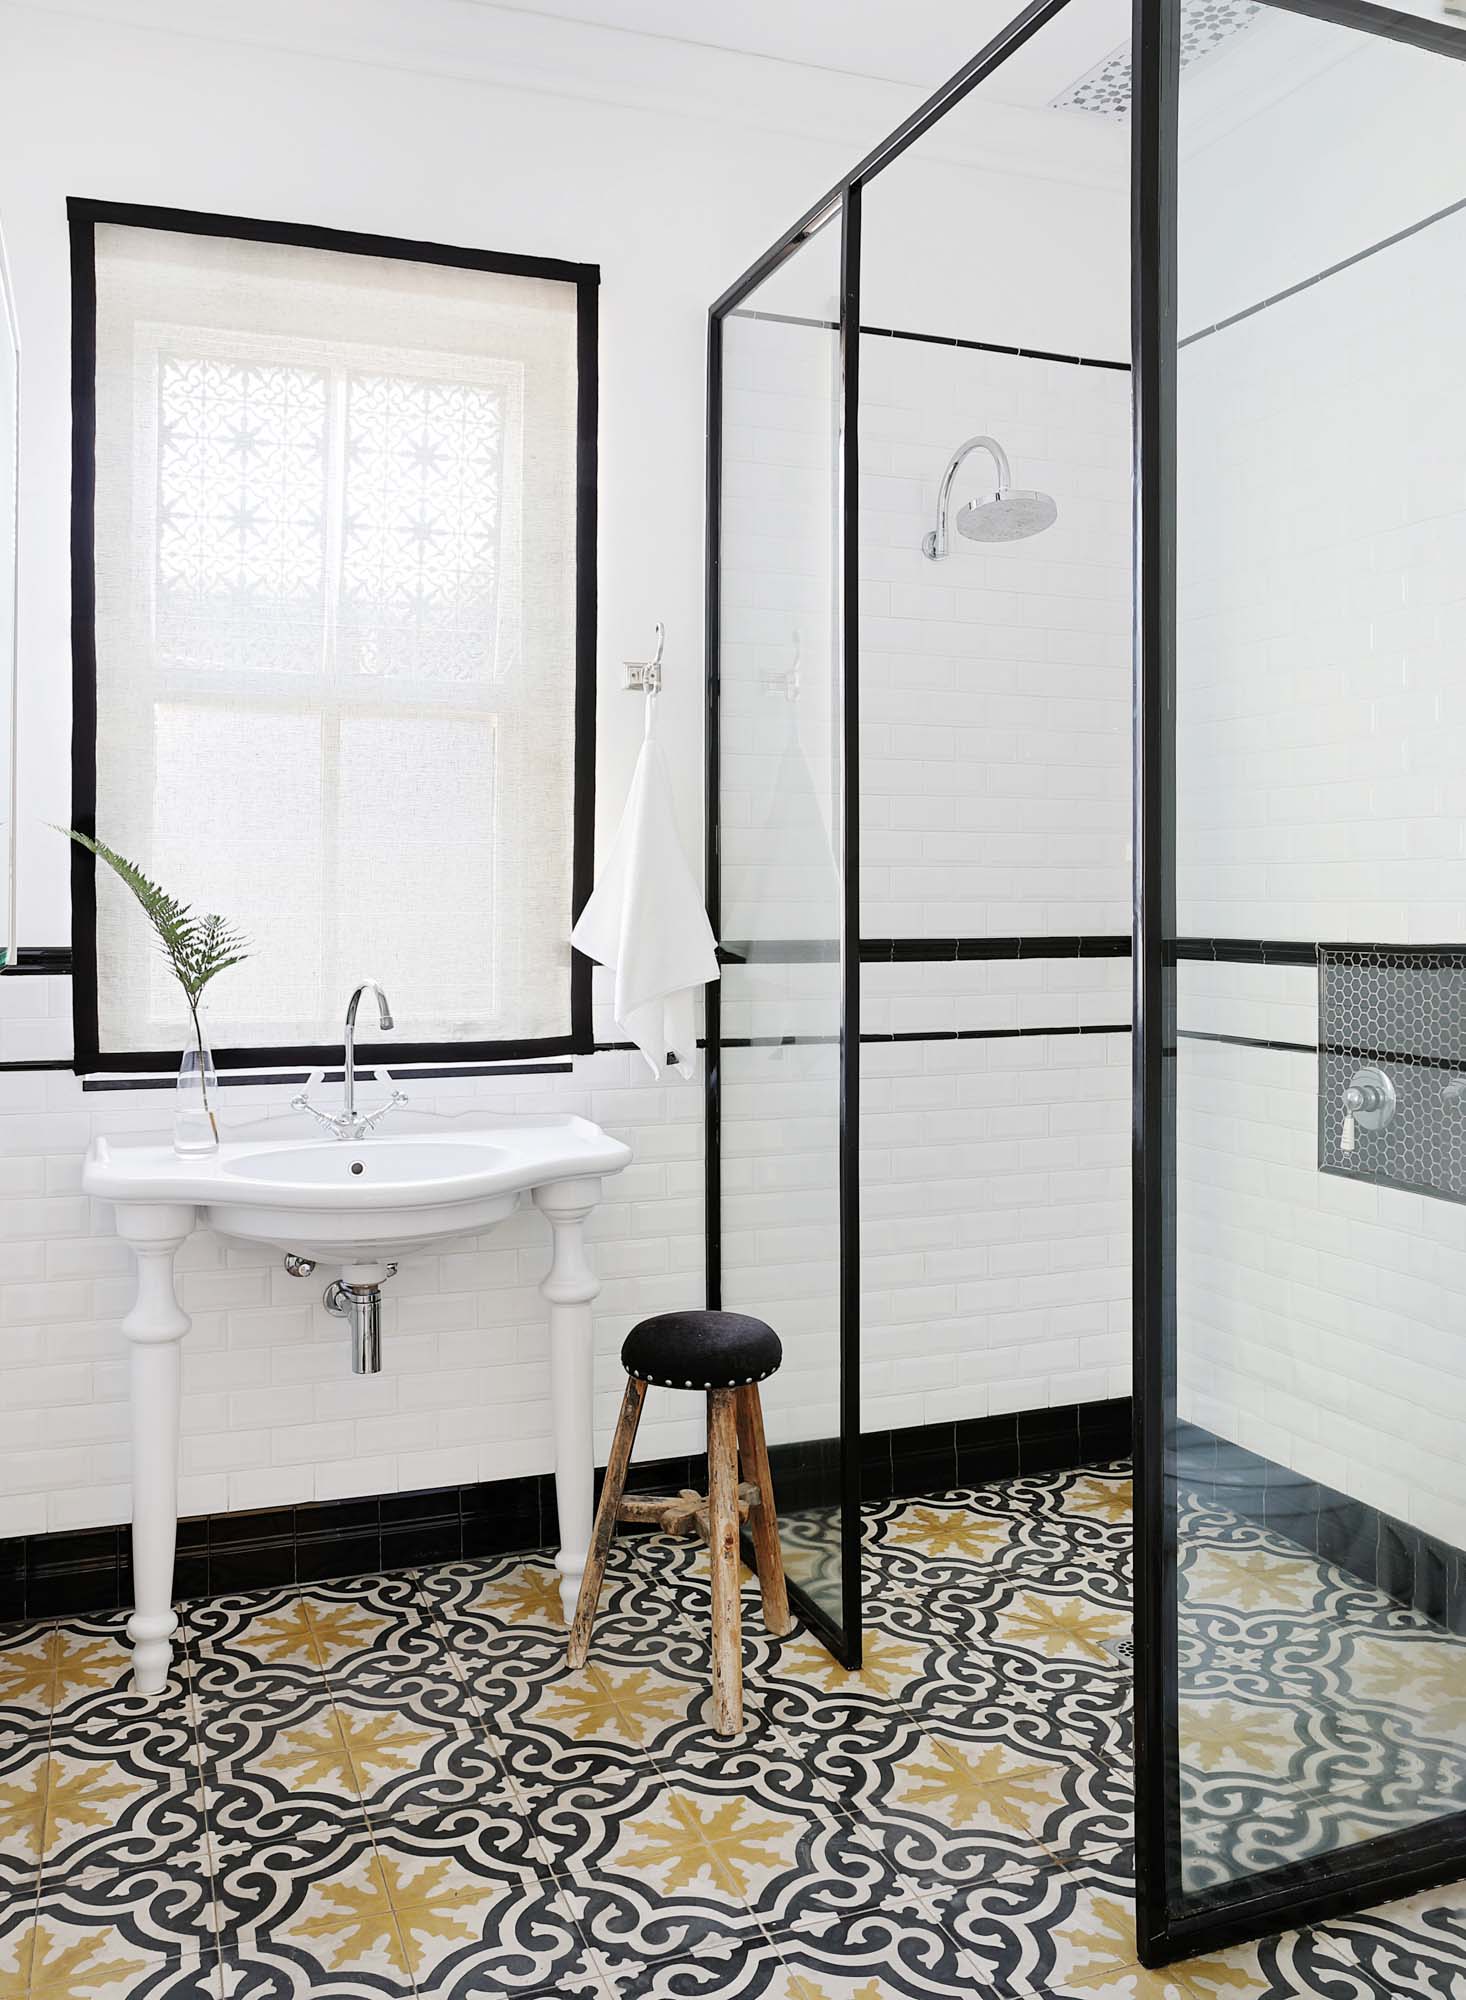 A bathroom with a black and glass shower screen, a white freestanding vanity sink, and navy and yellow patterned tiles